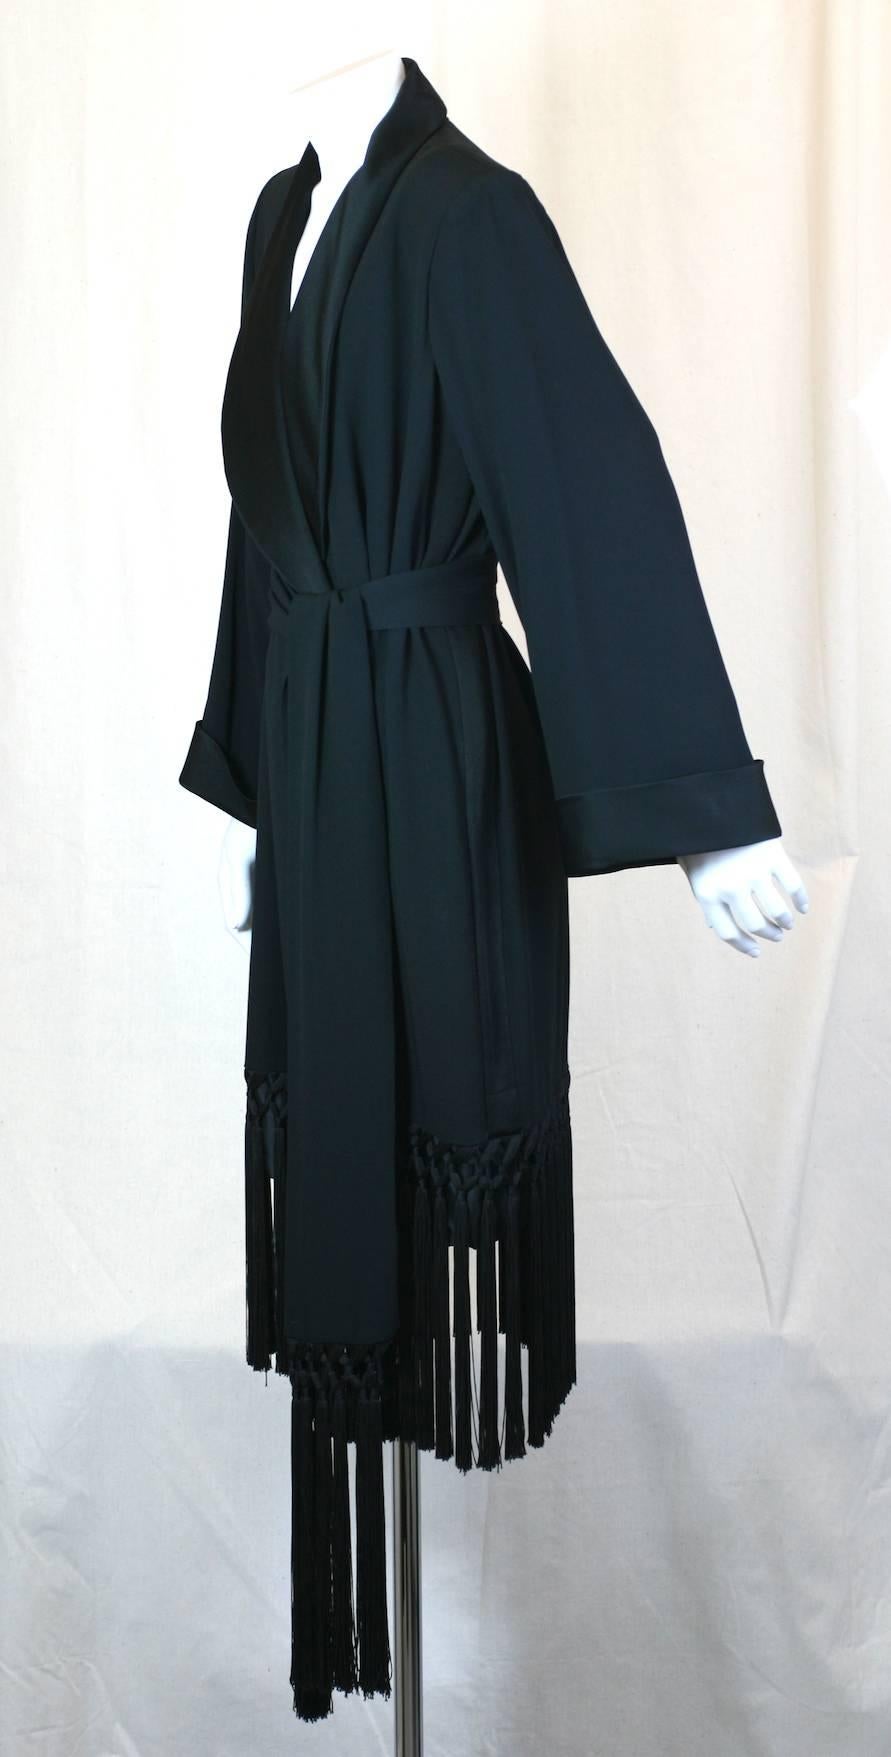 Yves Saint Laurent fringed crepe tuxedo dress. 
Easy, straight cut falling from strong shoulders with large bell cut sleeves with satin cuffs. Wrap style dress with long fringed detail applied on hem and sash. Wide shawl collar, cuffs and tuxedo